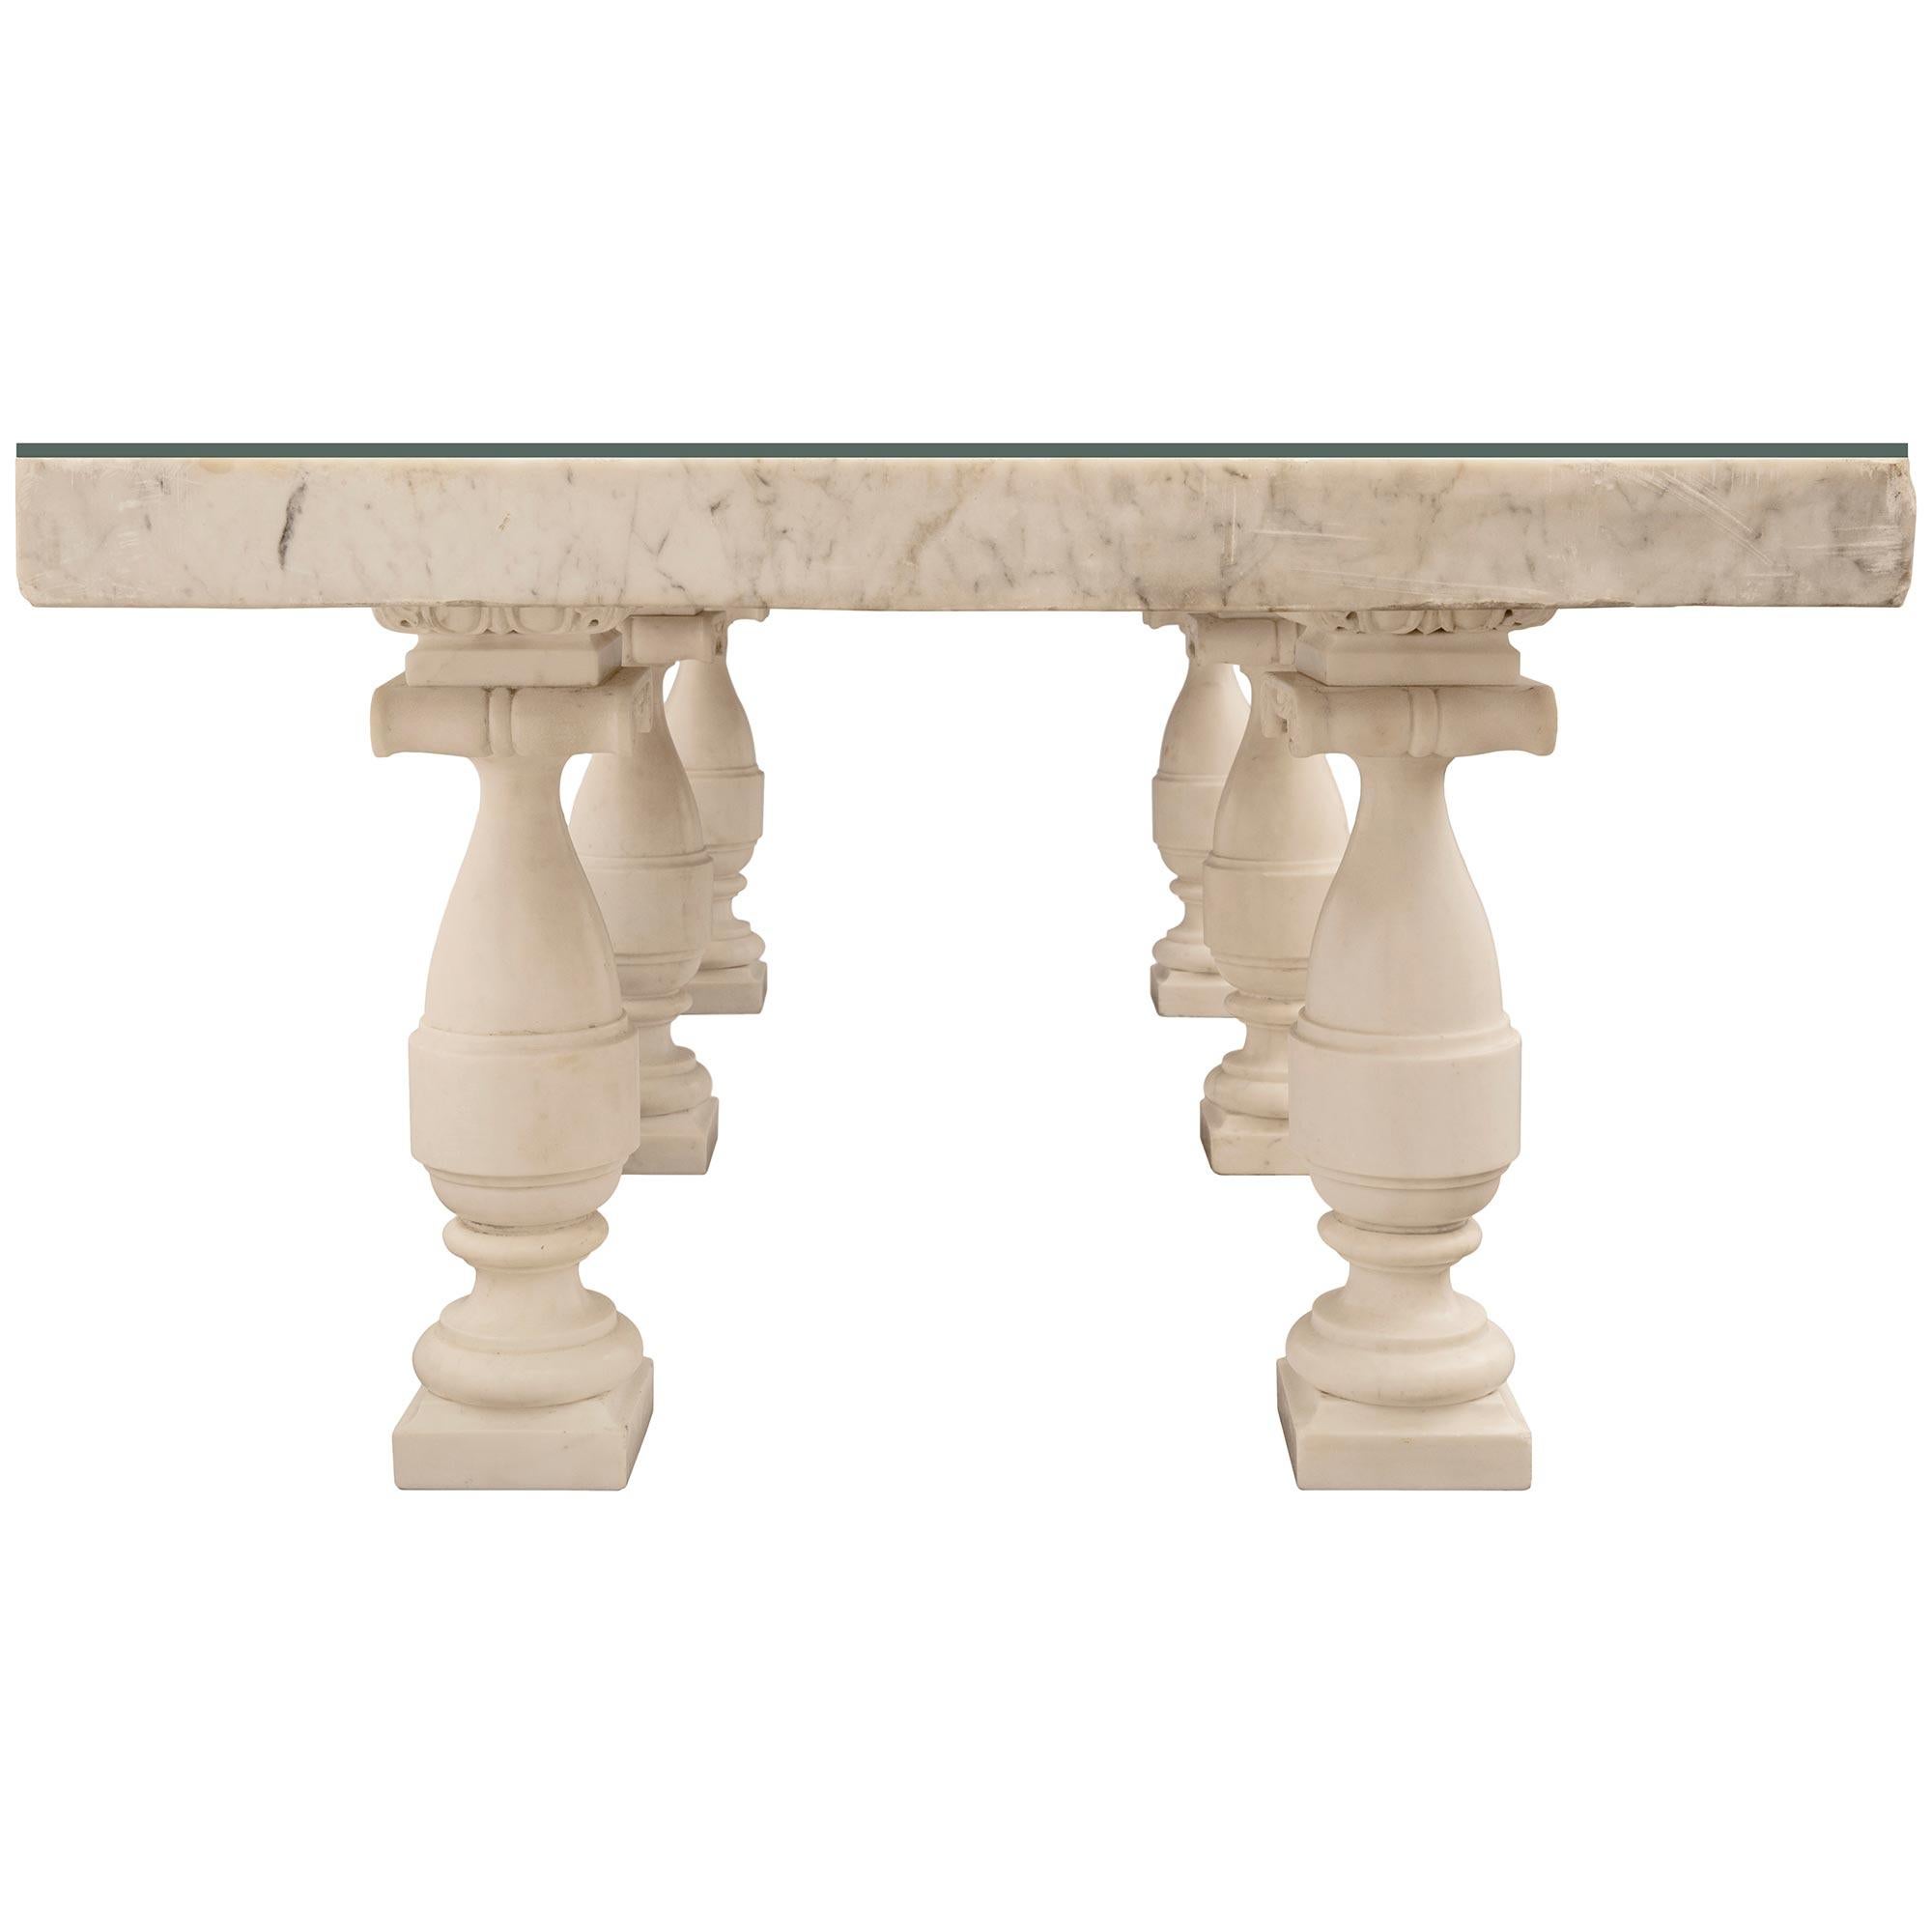 Italian Early 18th Century Louis XIV Period Marble Plateau Coffee Table In Good Condition For Sale In West Palm Beach, FL